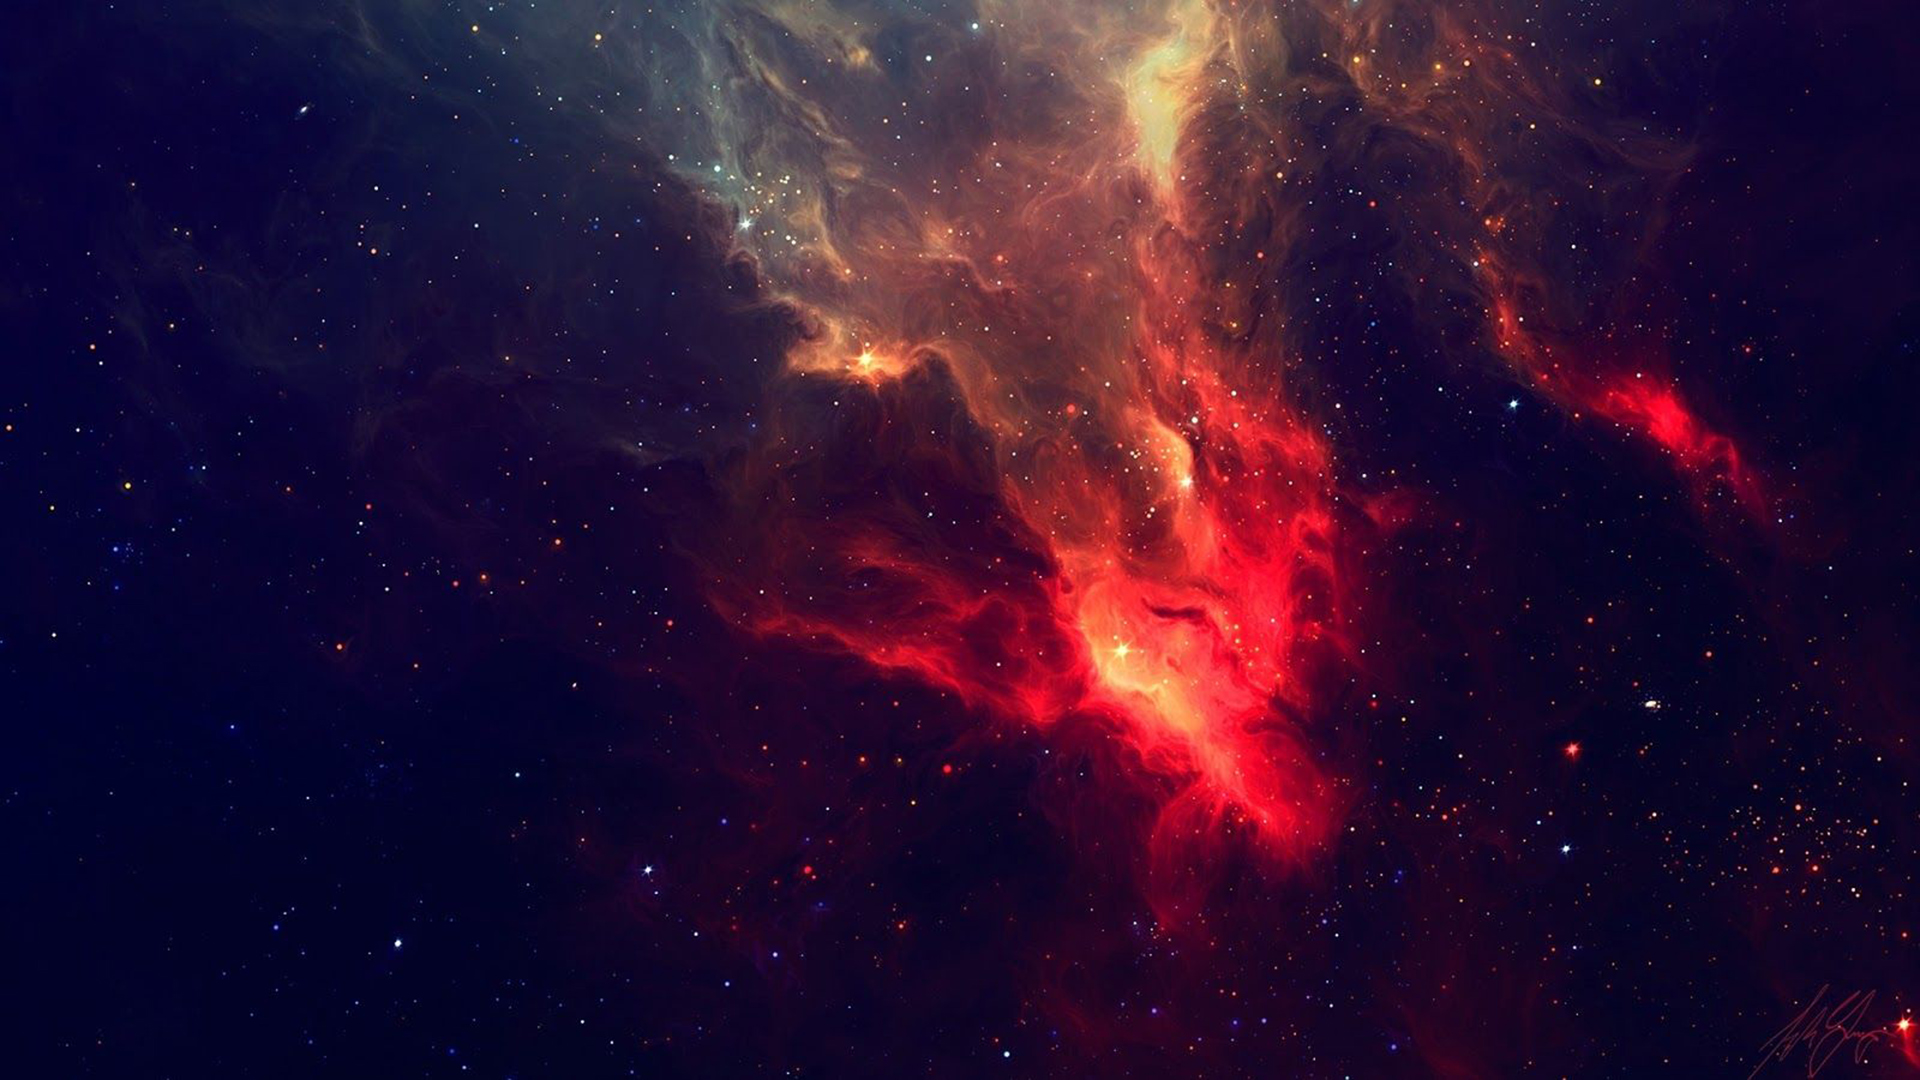 Aesthetic Space HD Wallpaper Free download